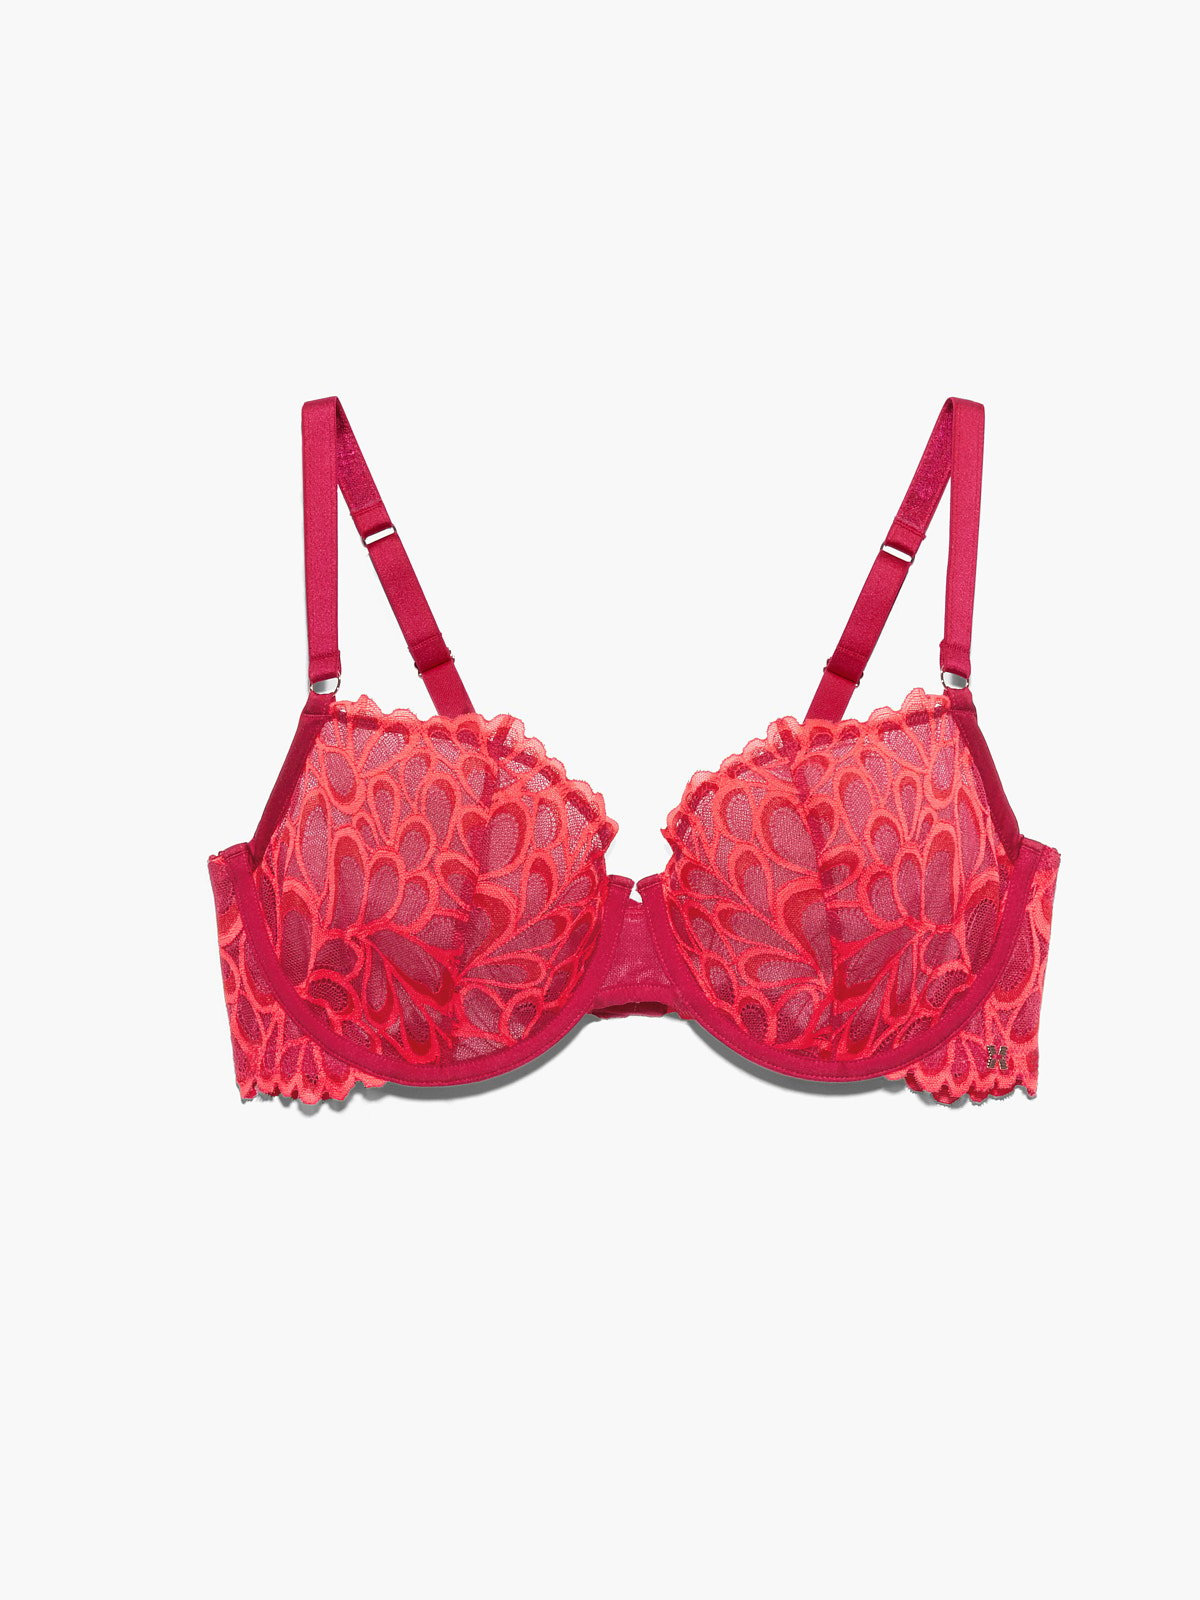 QUYUON Balconette Bra Women's Comfortable Lace Breathable Bra Underwear No  Underwire Active Fit Thin and Lightweight Bra Red XL 